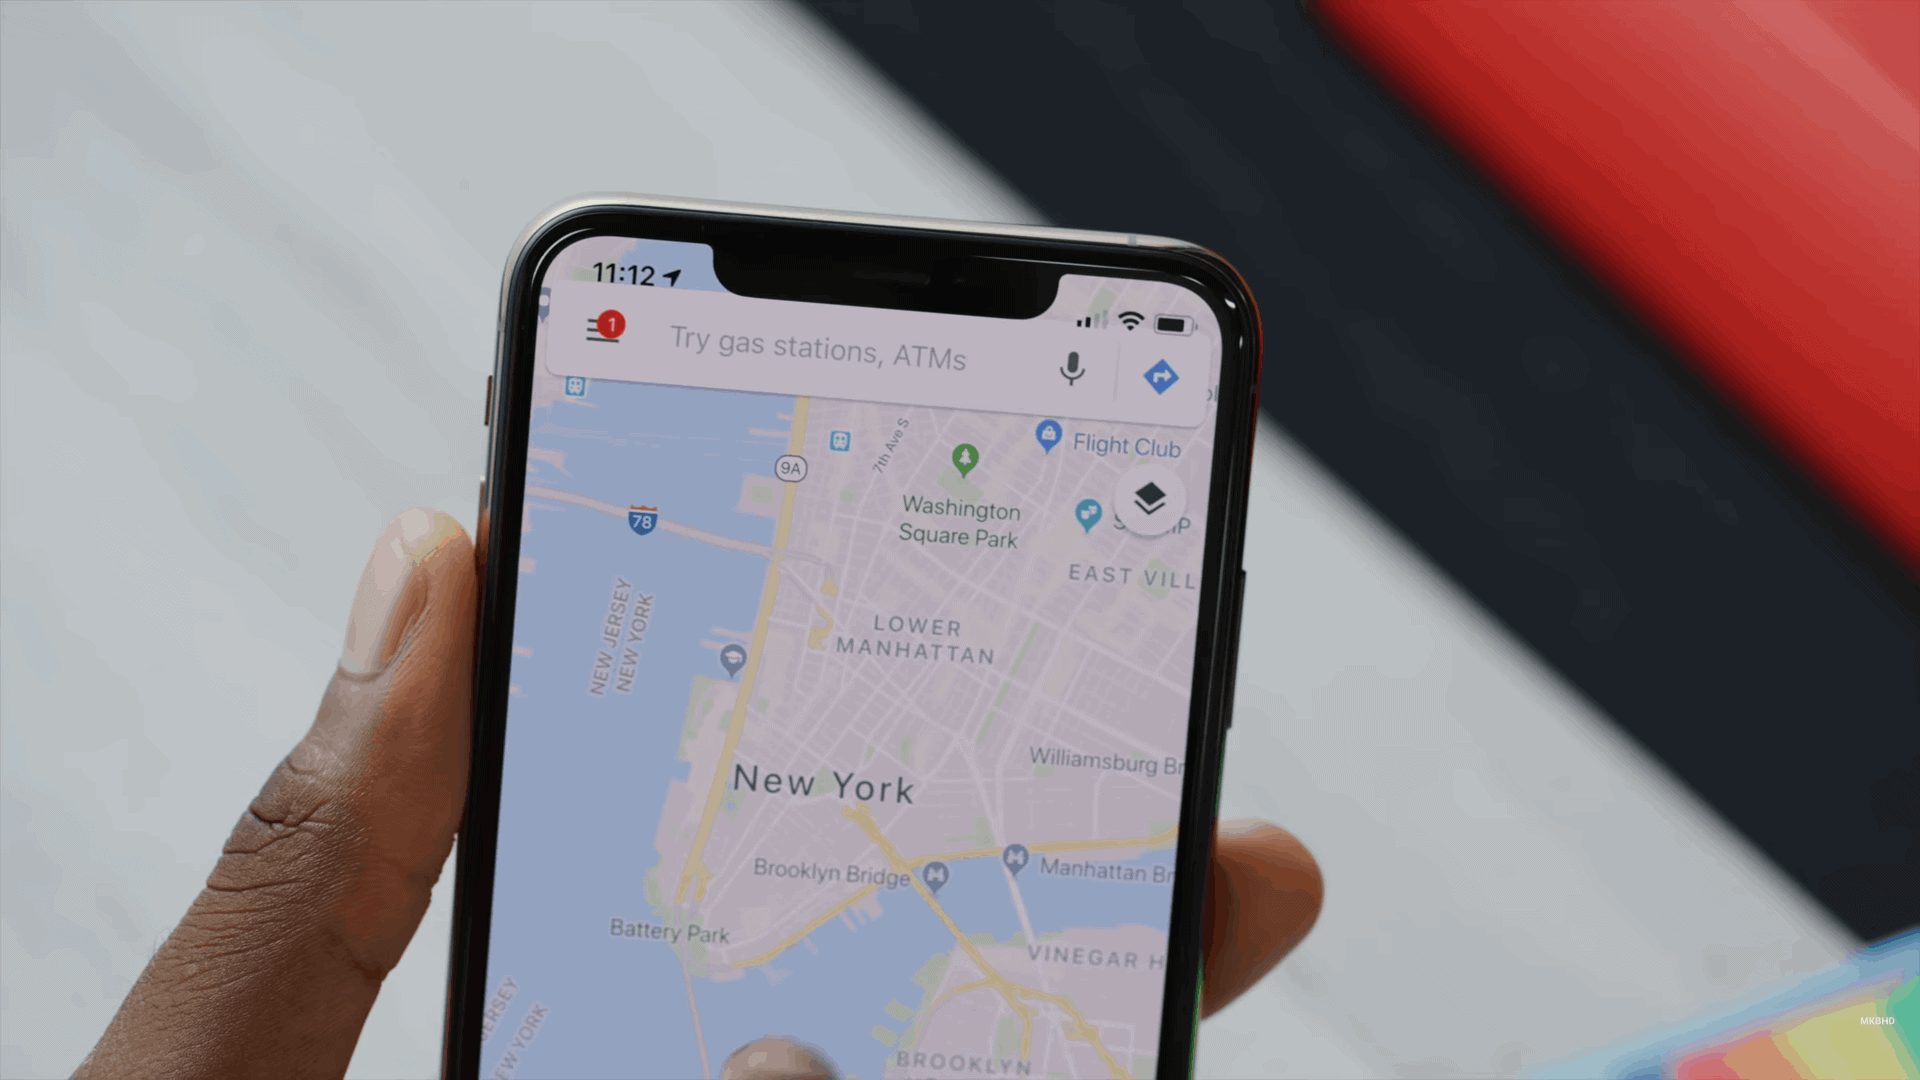 Google Chrome updated to fully support iPhone XS Max